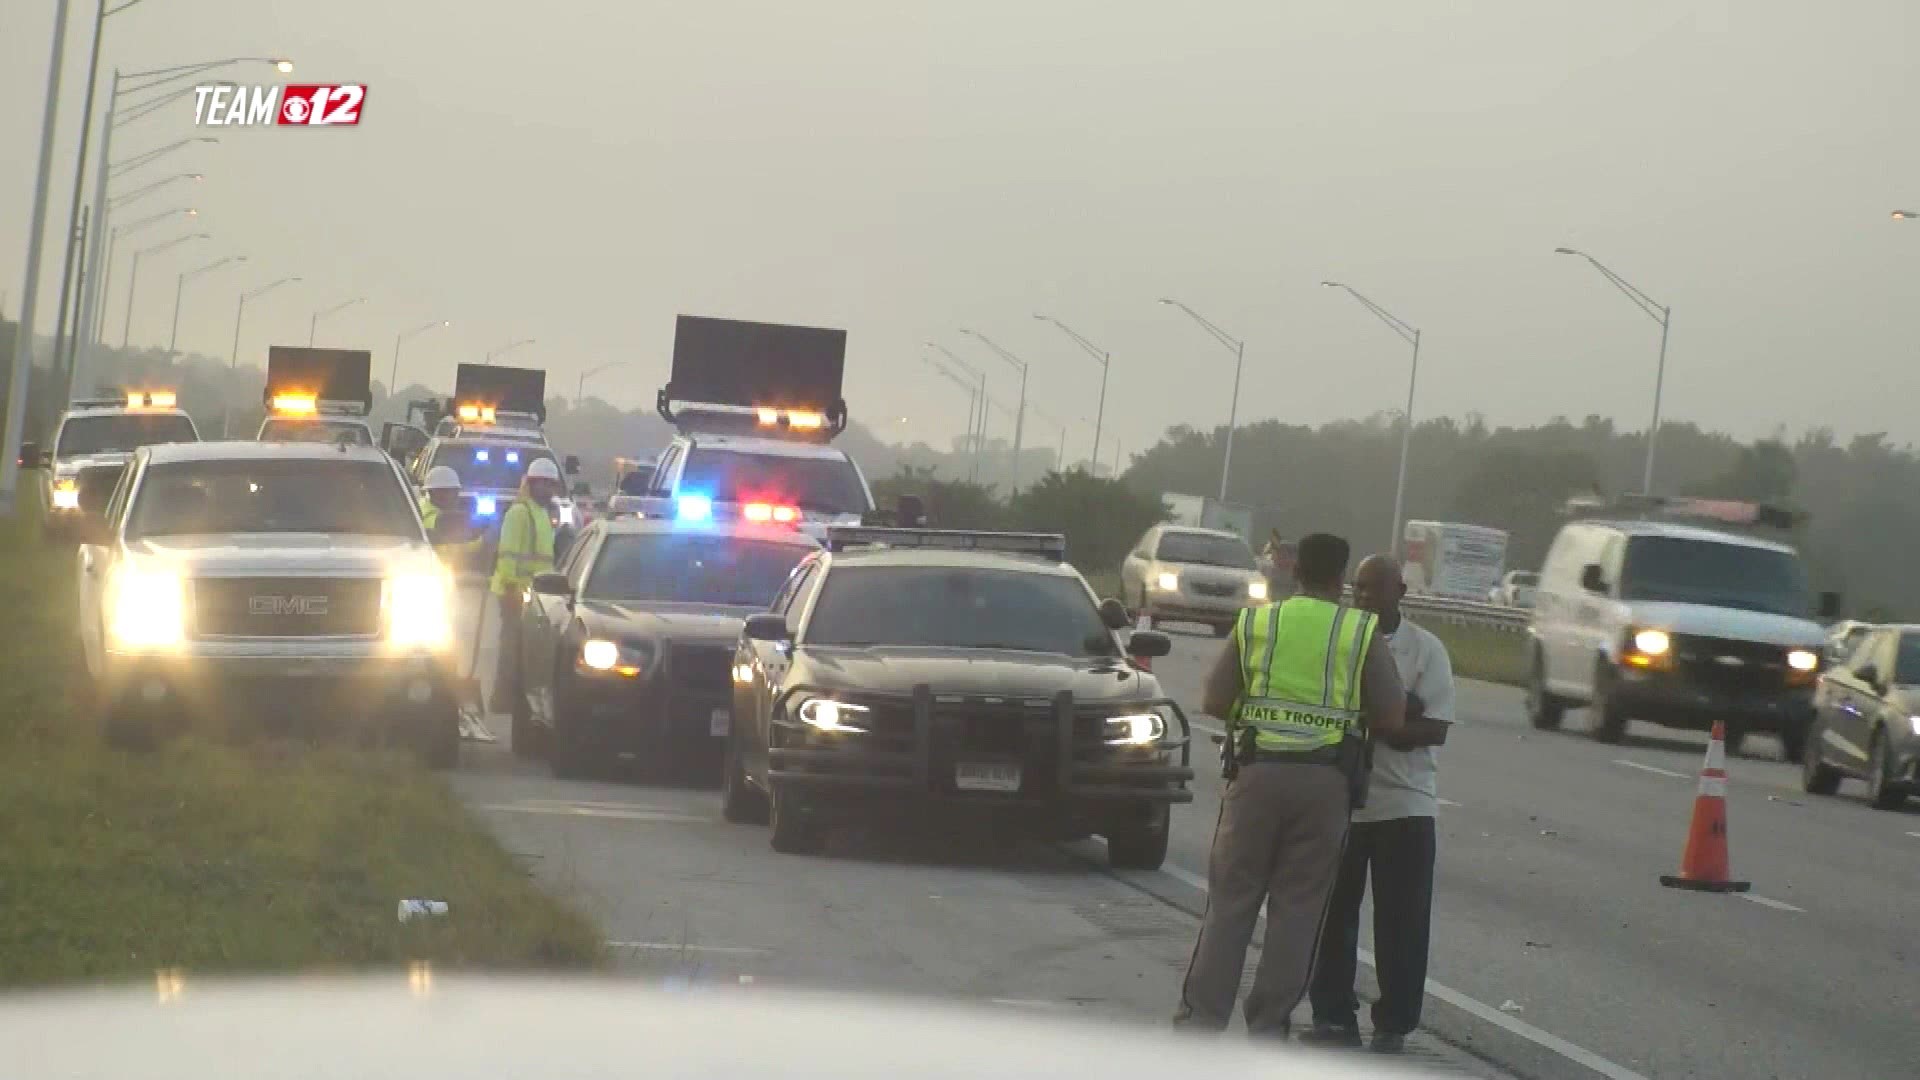 A Florida Highway Patrol trooper was hit by an out of control driver on I-95 while investigating a crash. The trooper is recovering at St. Mary's Medical Center in West Palm Beach.